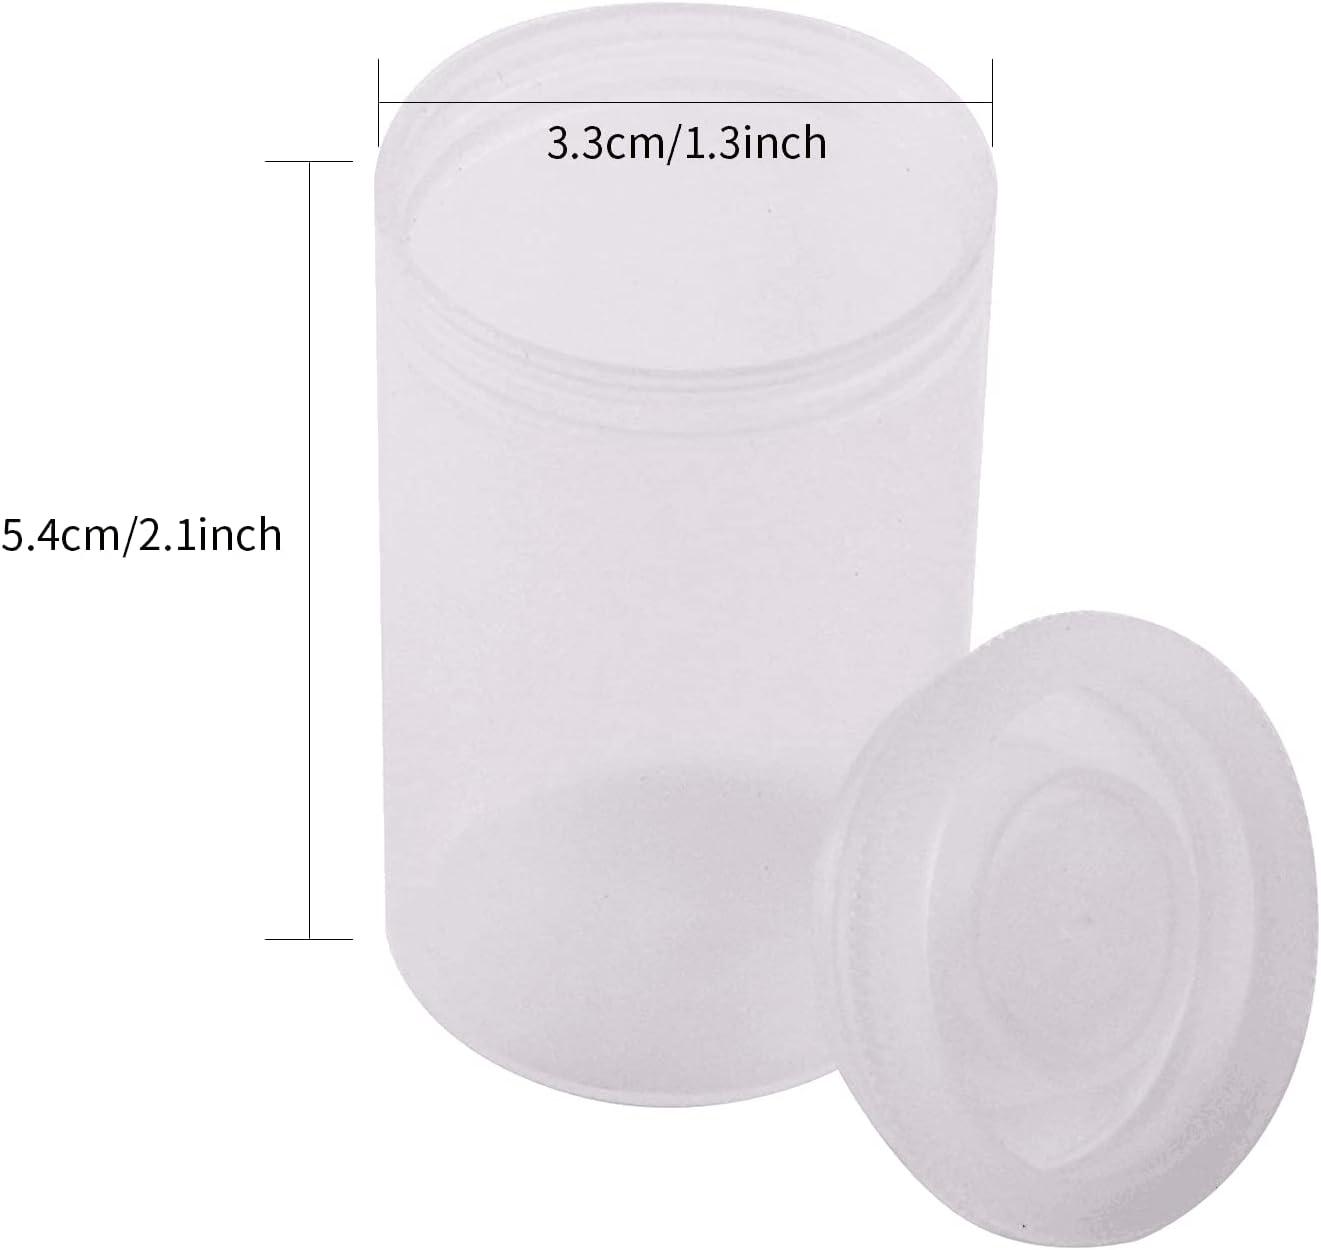 35mm Caliber Plastic Film Canisters-20pc (Clear)